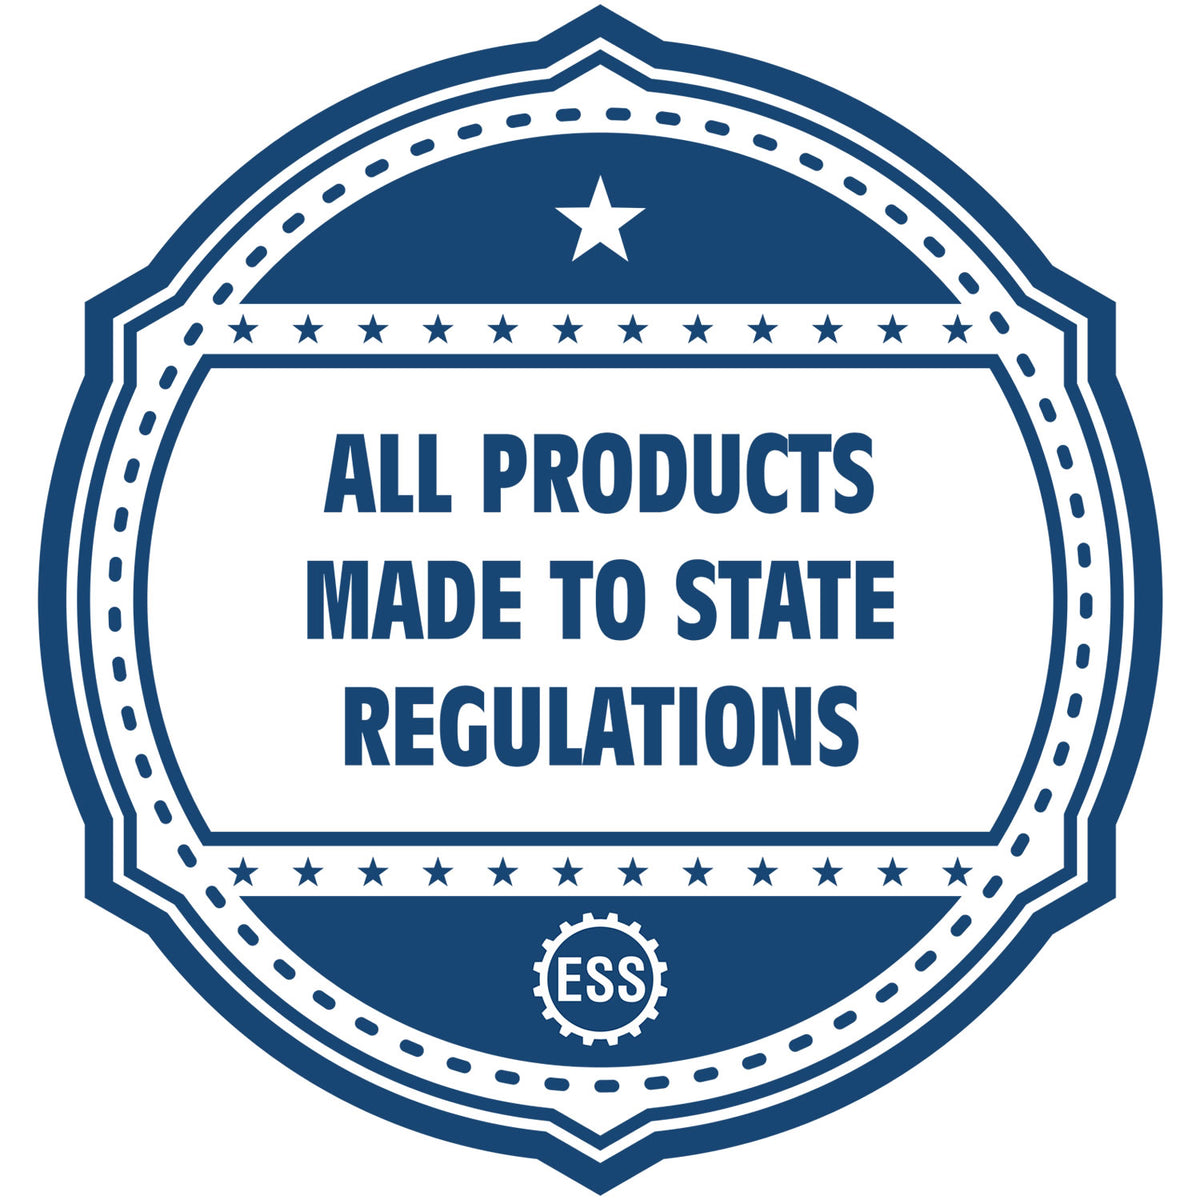 An icon or badge element for the Extended Long Reach Maine Architect Seal Embosser showing that this product is made in compliance with state regulations.